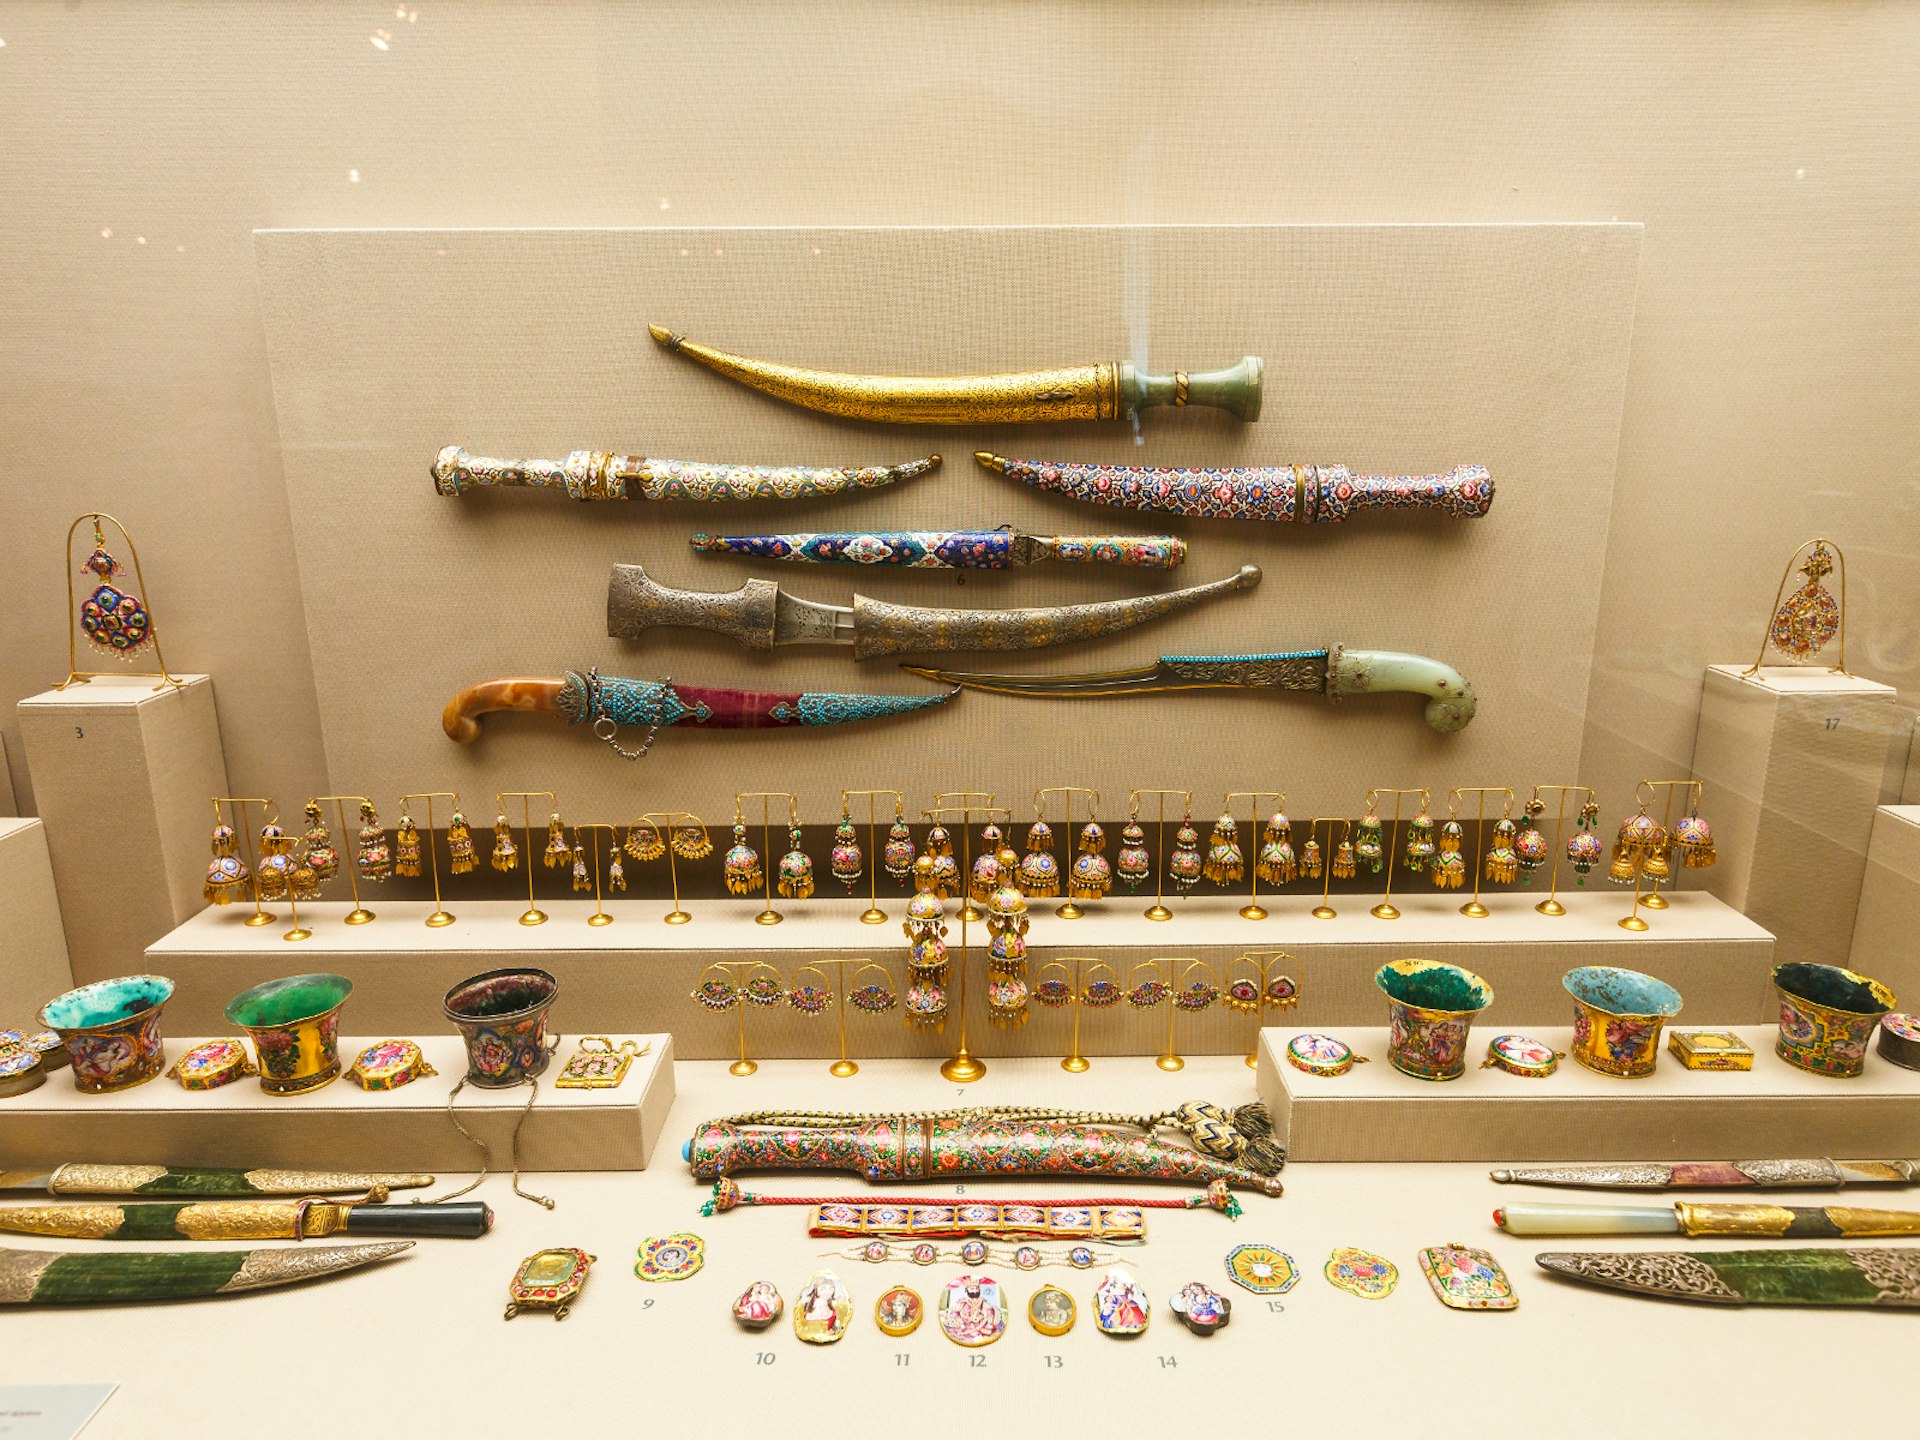 A broad display of jewellery and daggers, many with intricate patterns. Colours are predominantly gold, blue and red